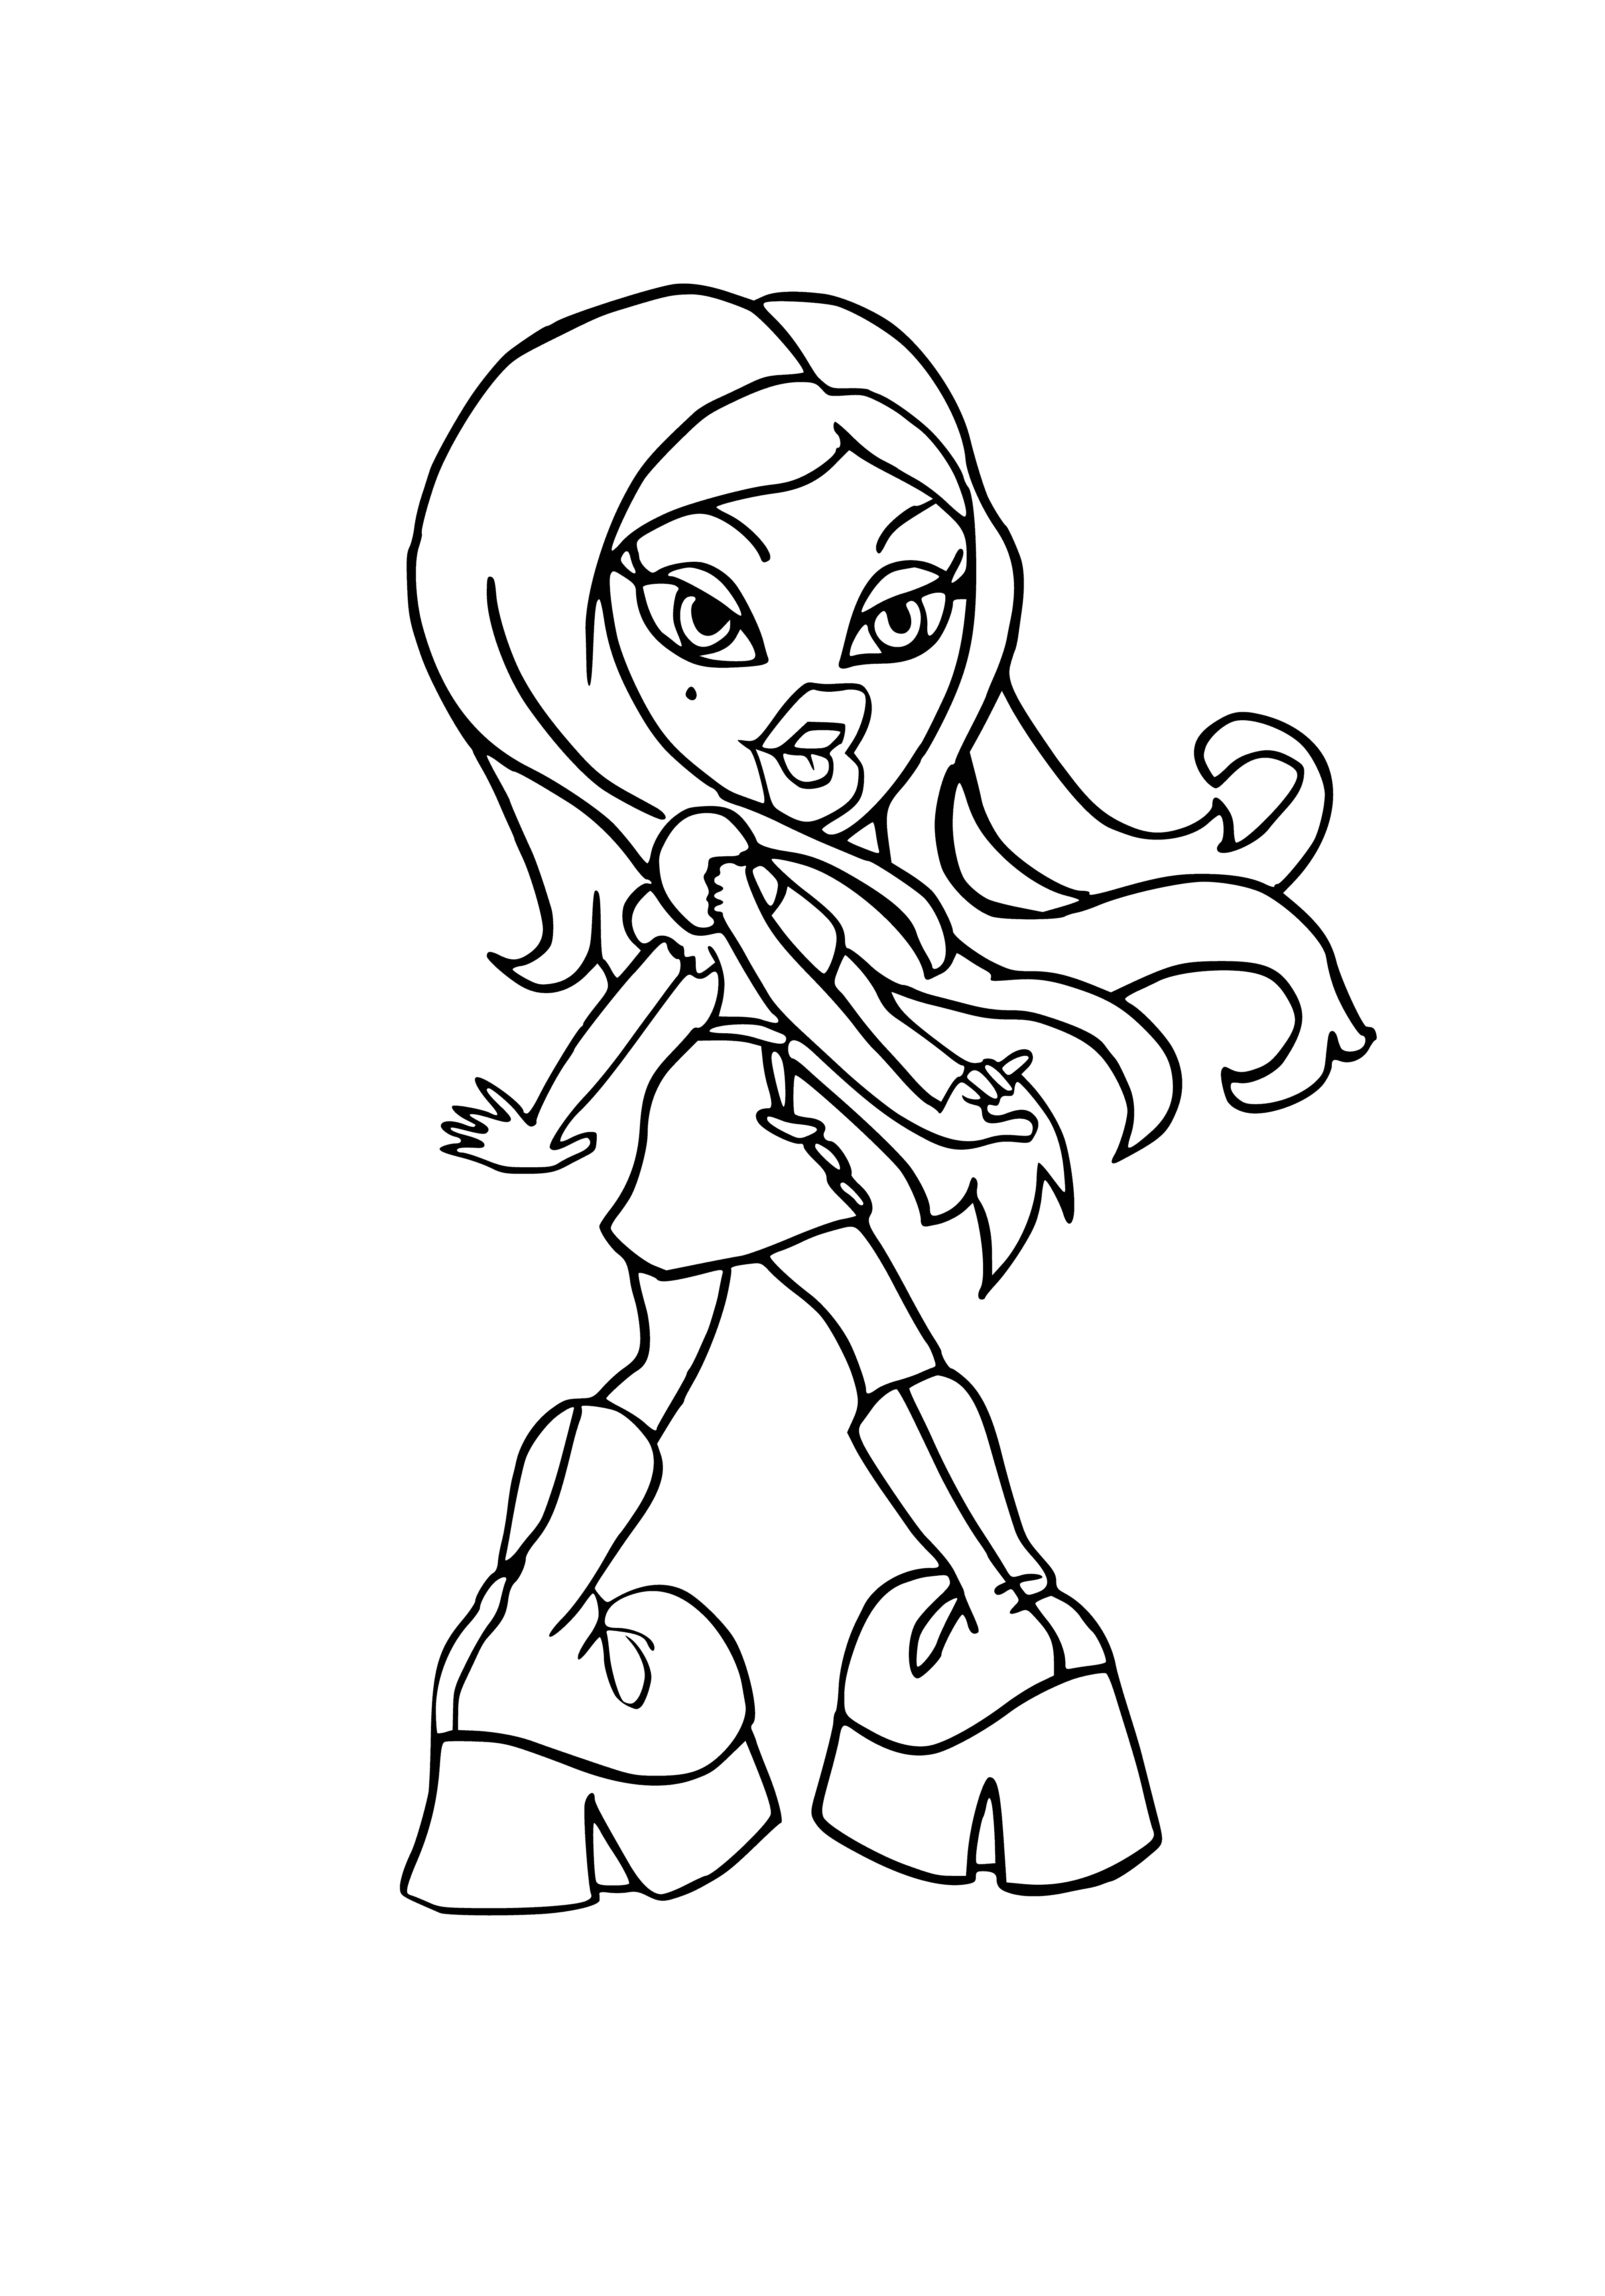 coloring page: 4 colorful dolls with big eyes & lips wearing different clothes: dress, skirt/top, jeans, bathing suit. #dollcoloringpage